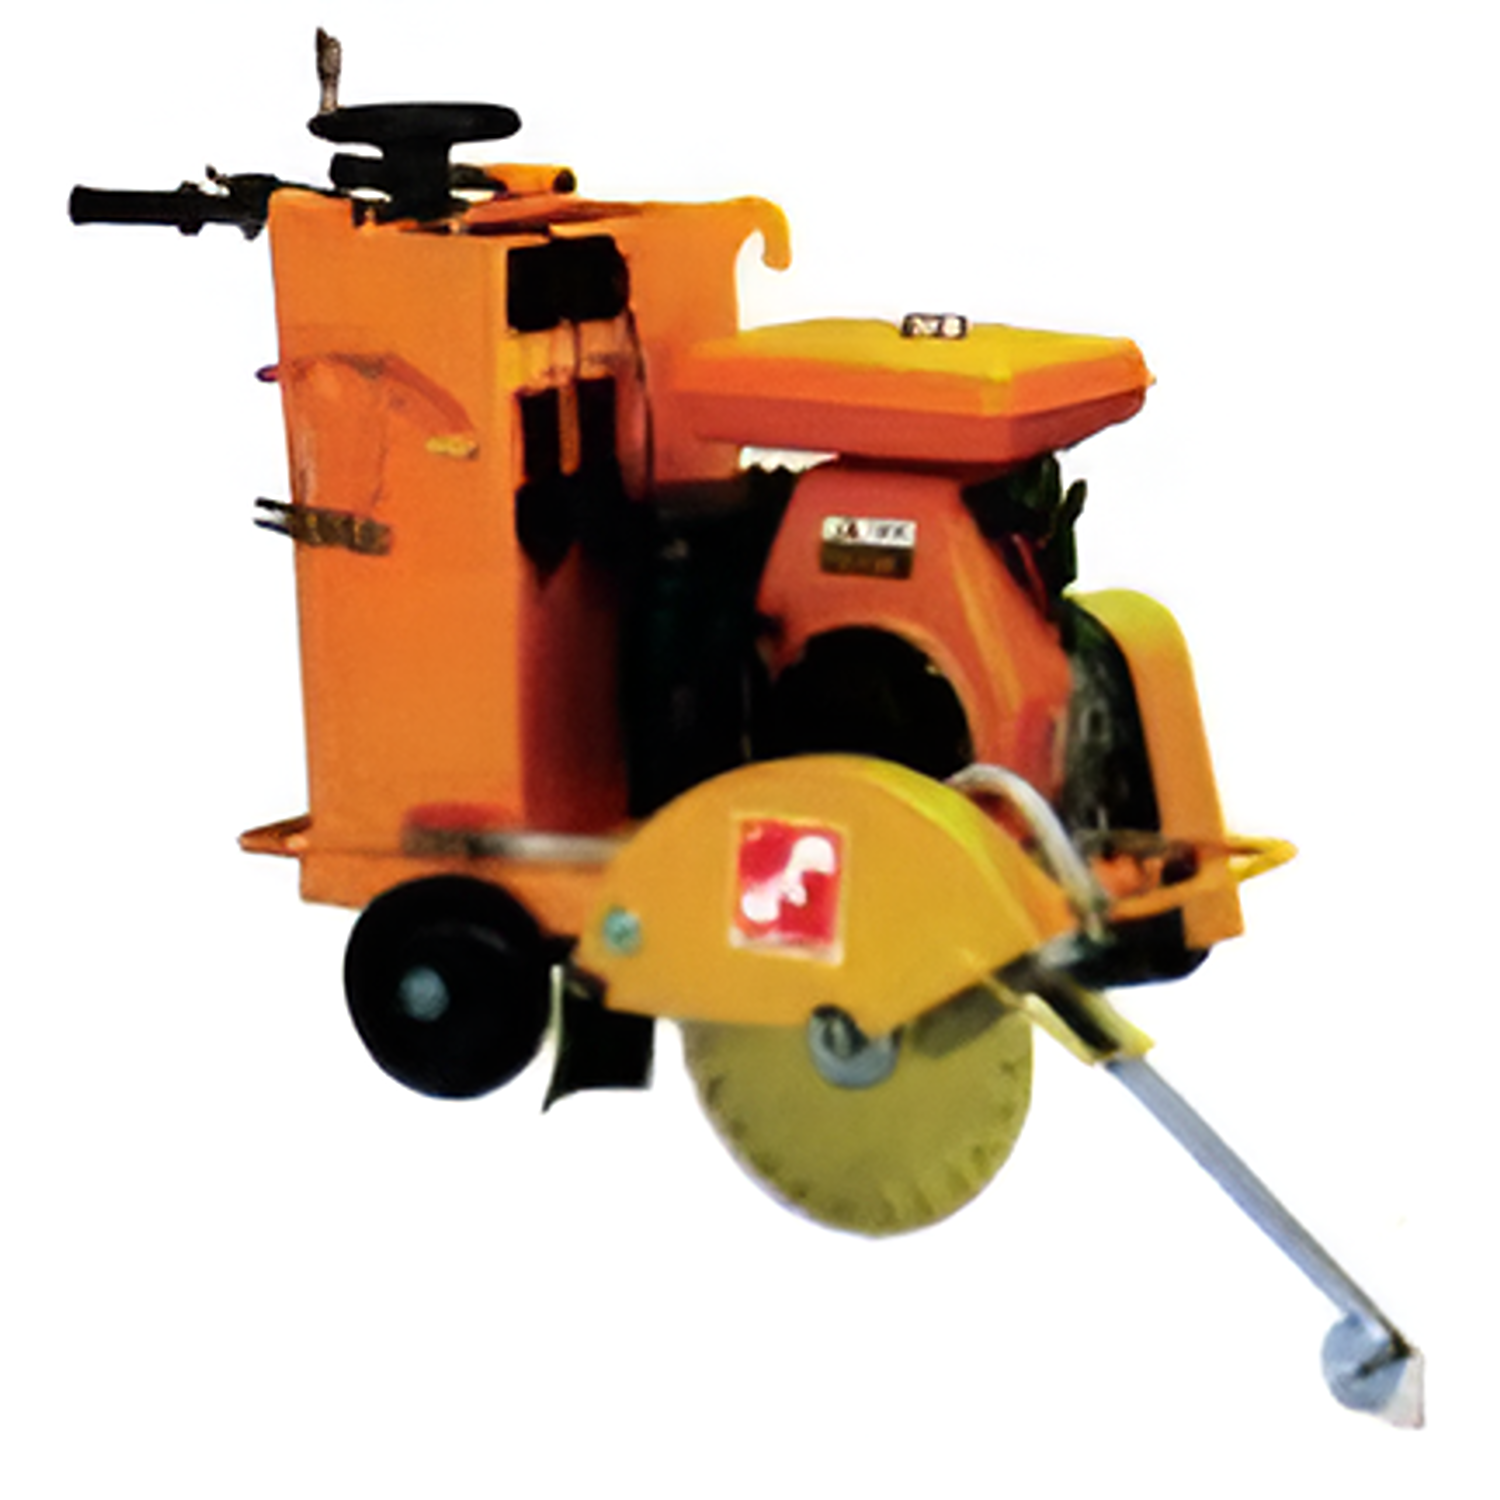 YEW AIK AA00235 & AA00236 Concrete Cutter Model AET16 & AET18 - Premium Concrete Cutter from YEW AIK - Shop now at Yew Aik.